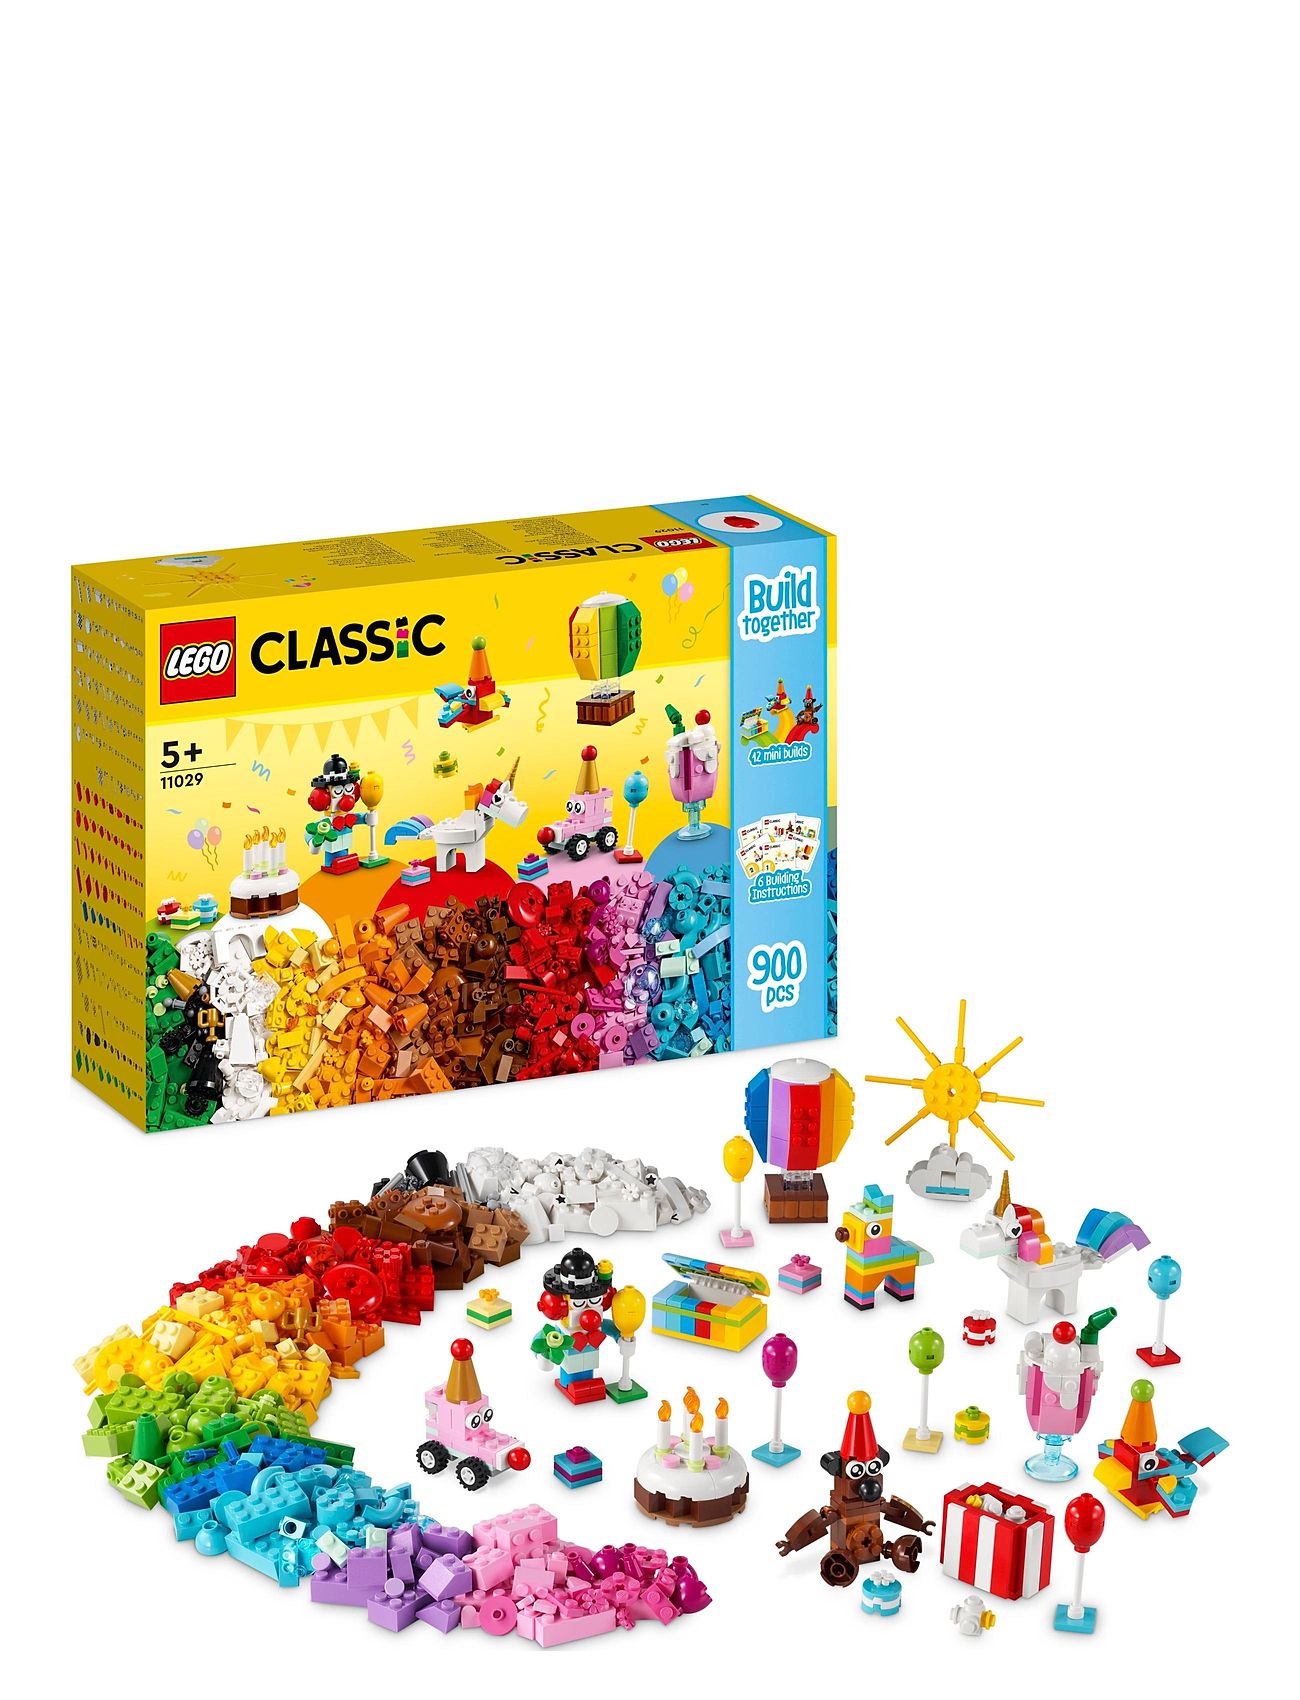 Creative Party Box Play Together Set Toys Lego Toys Lego classic Multi/patterned LEGO